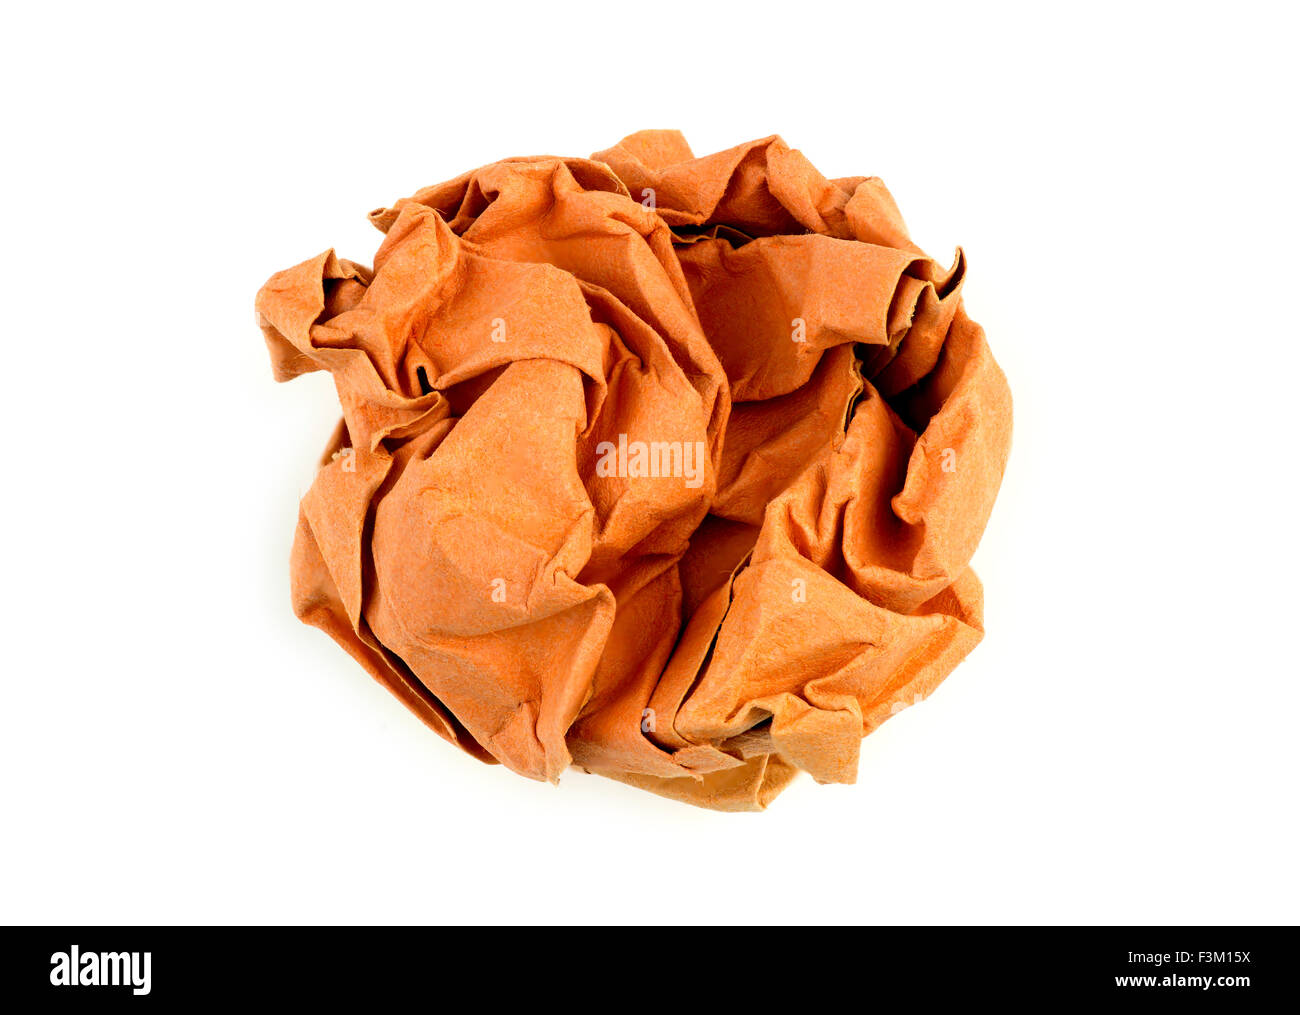 Vertical Background From Orange Colour Crumpled Paper Stock Photo, Picture  and Royalty Free Image. Image 55725966.